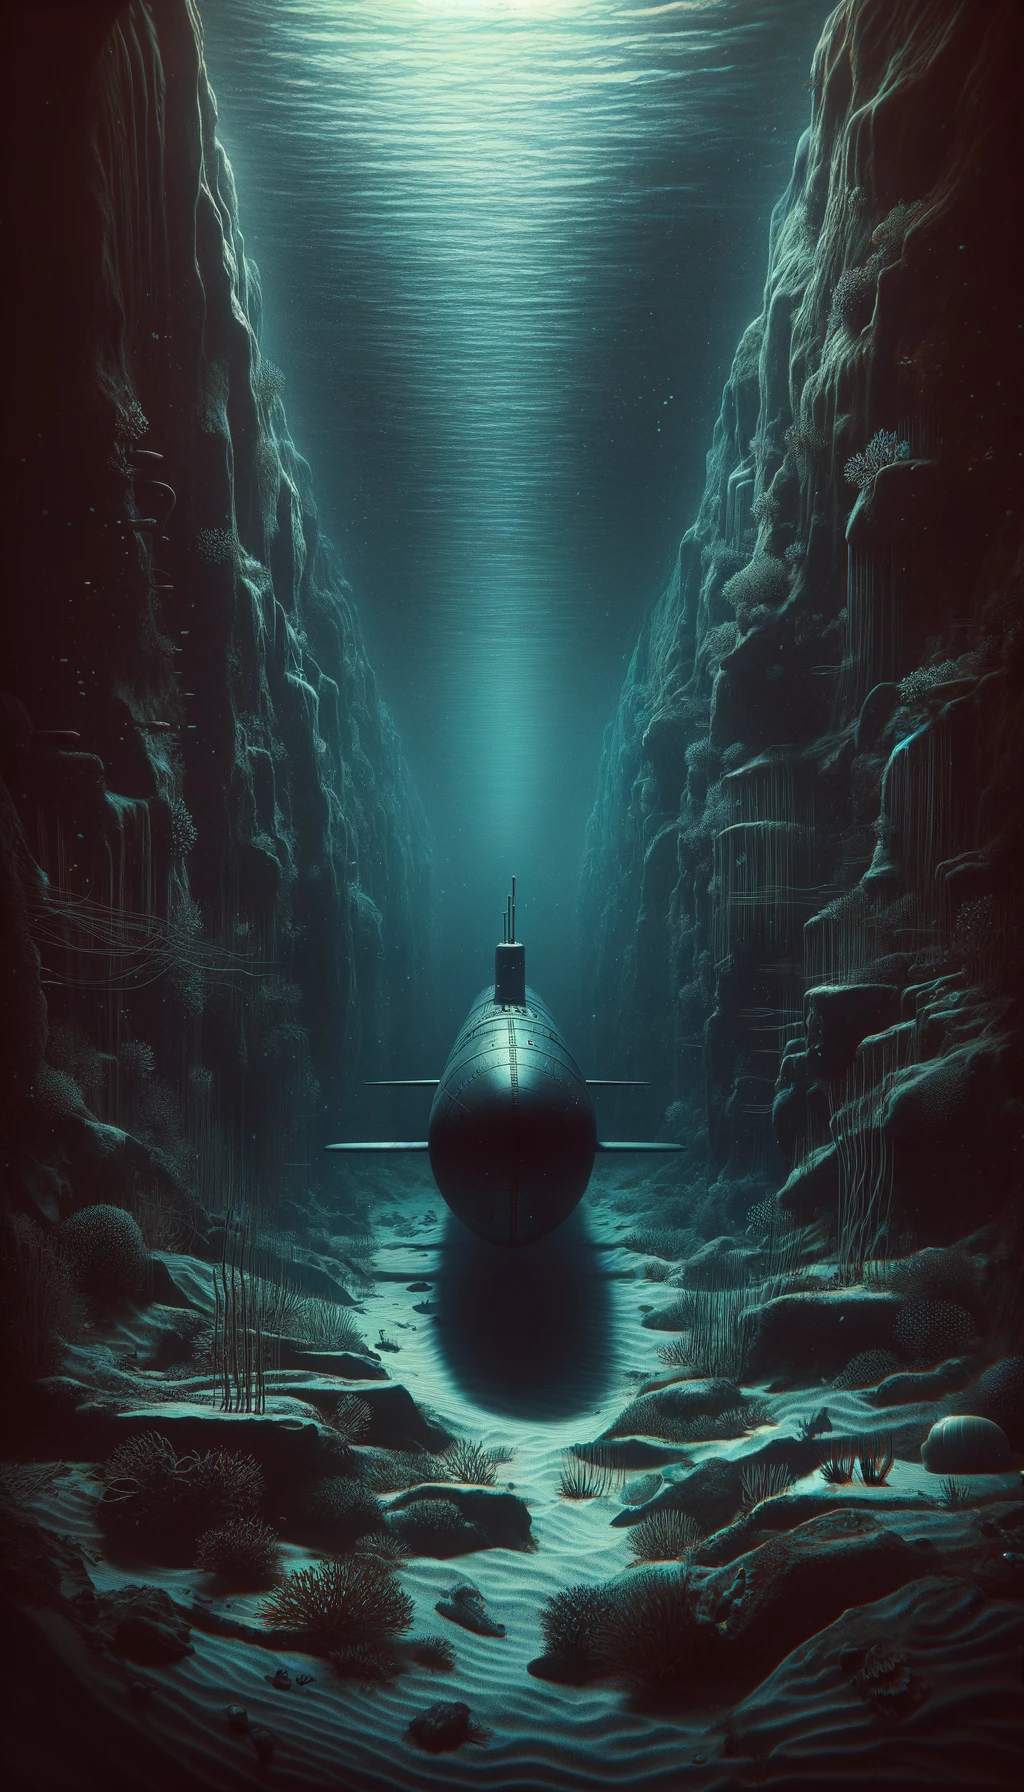 Artistic representation of a submarine at the bottom of the ocean